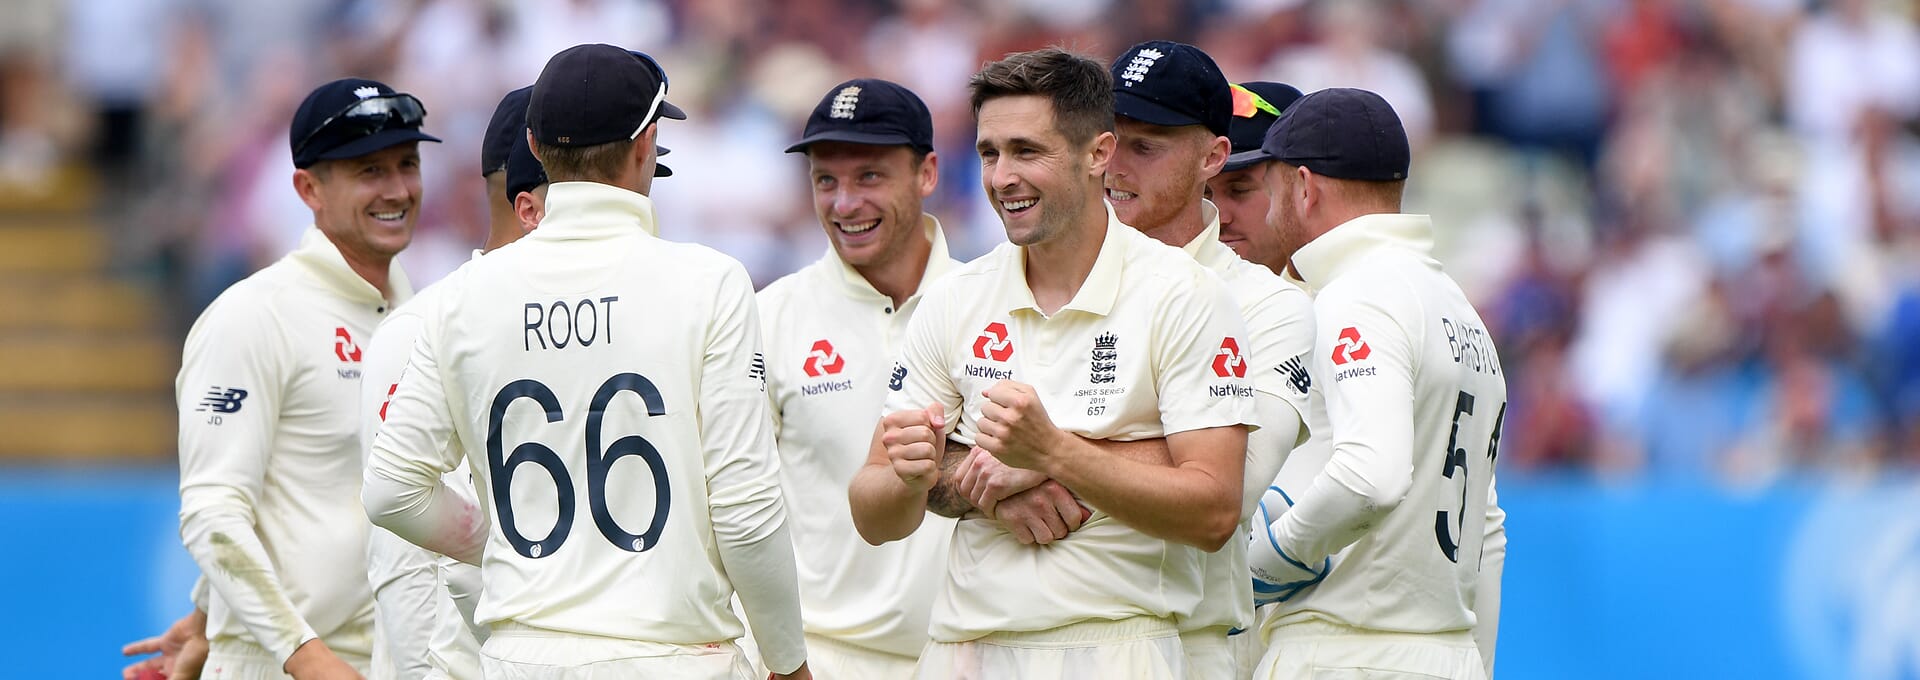 test-series -hospitality-packages-england